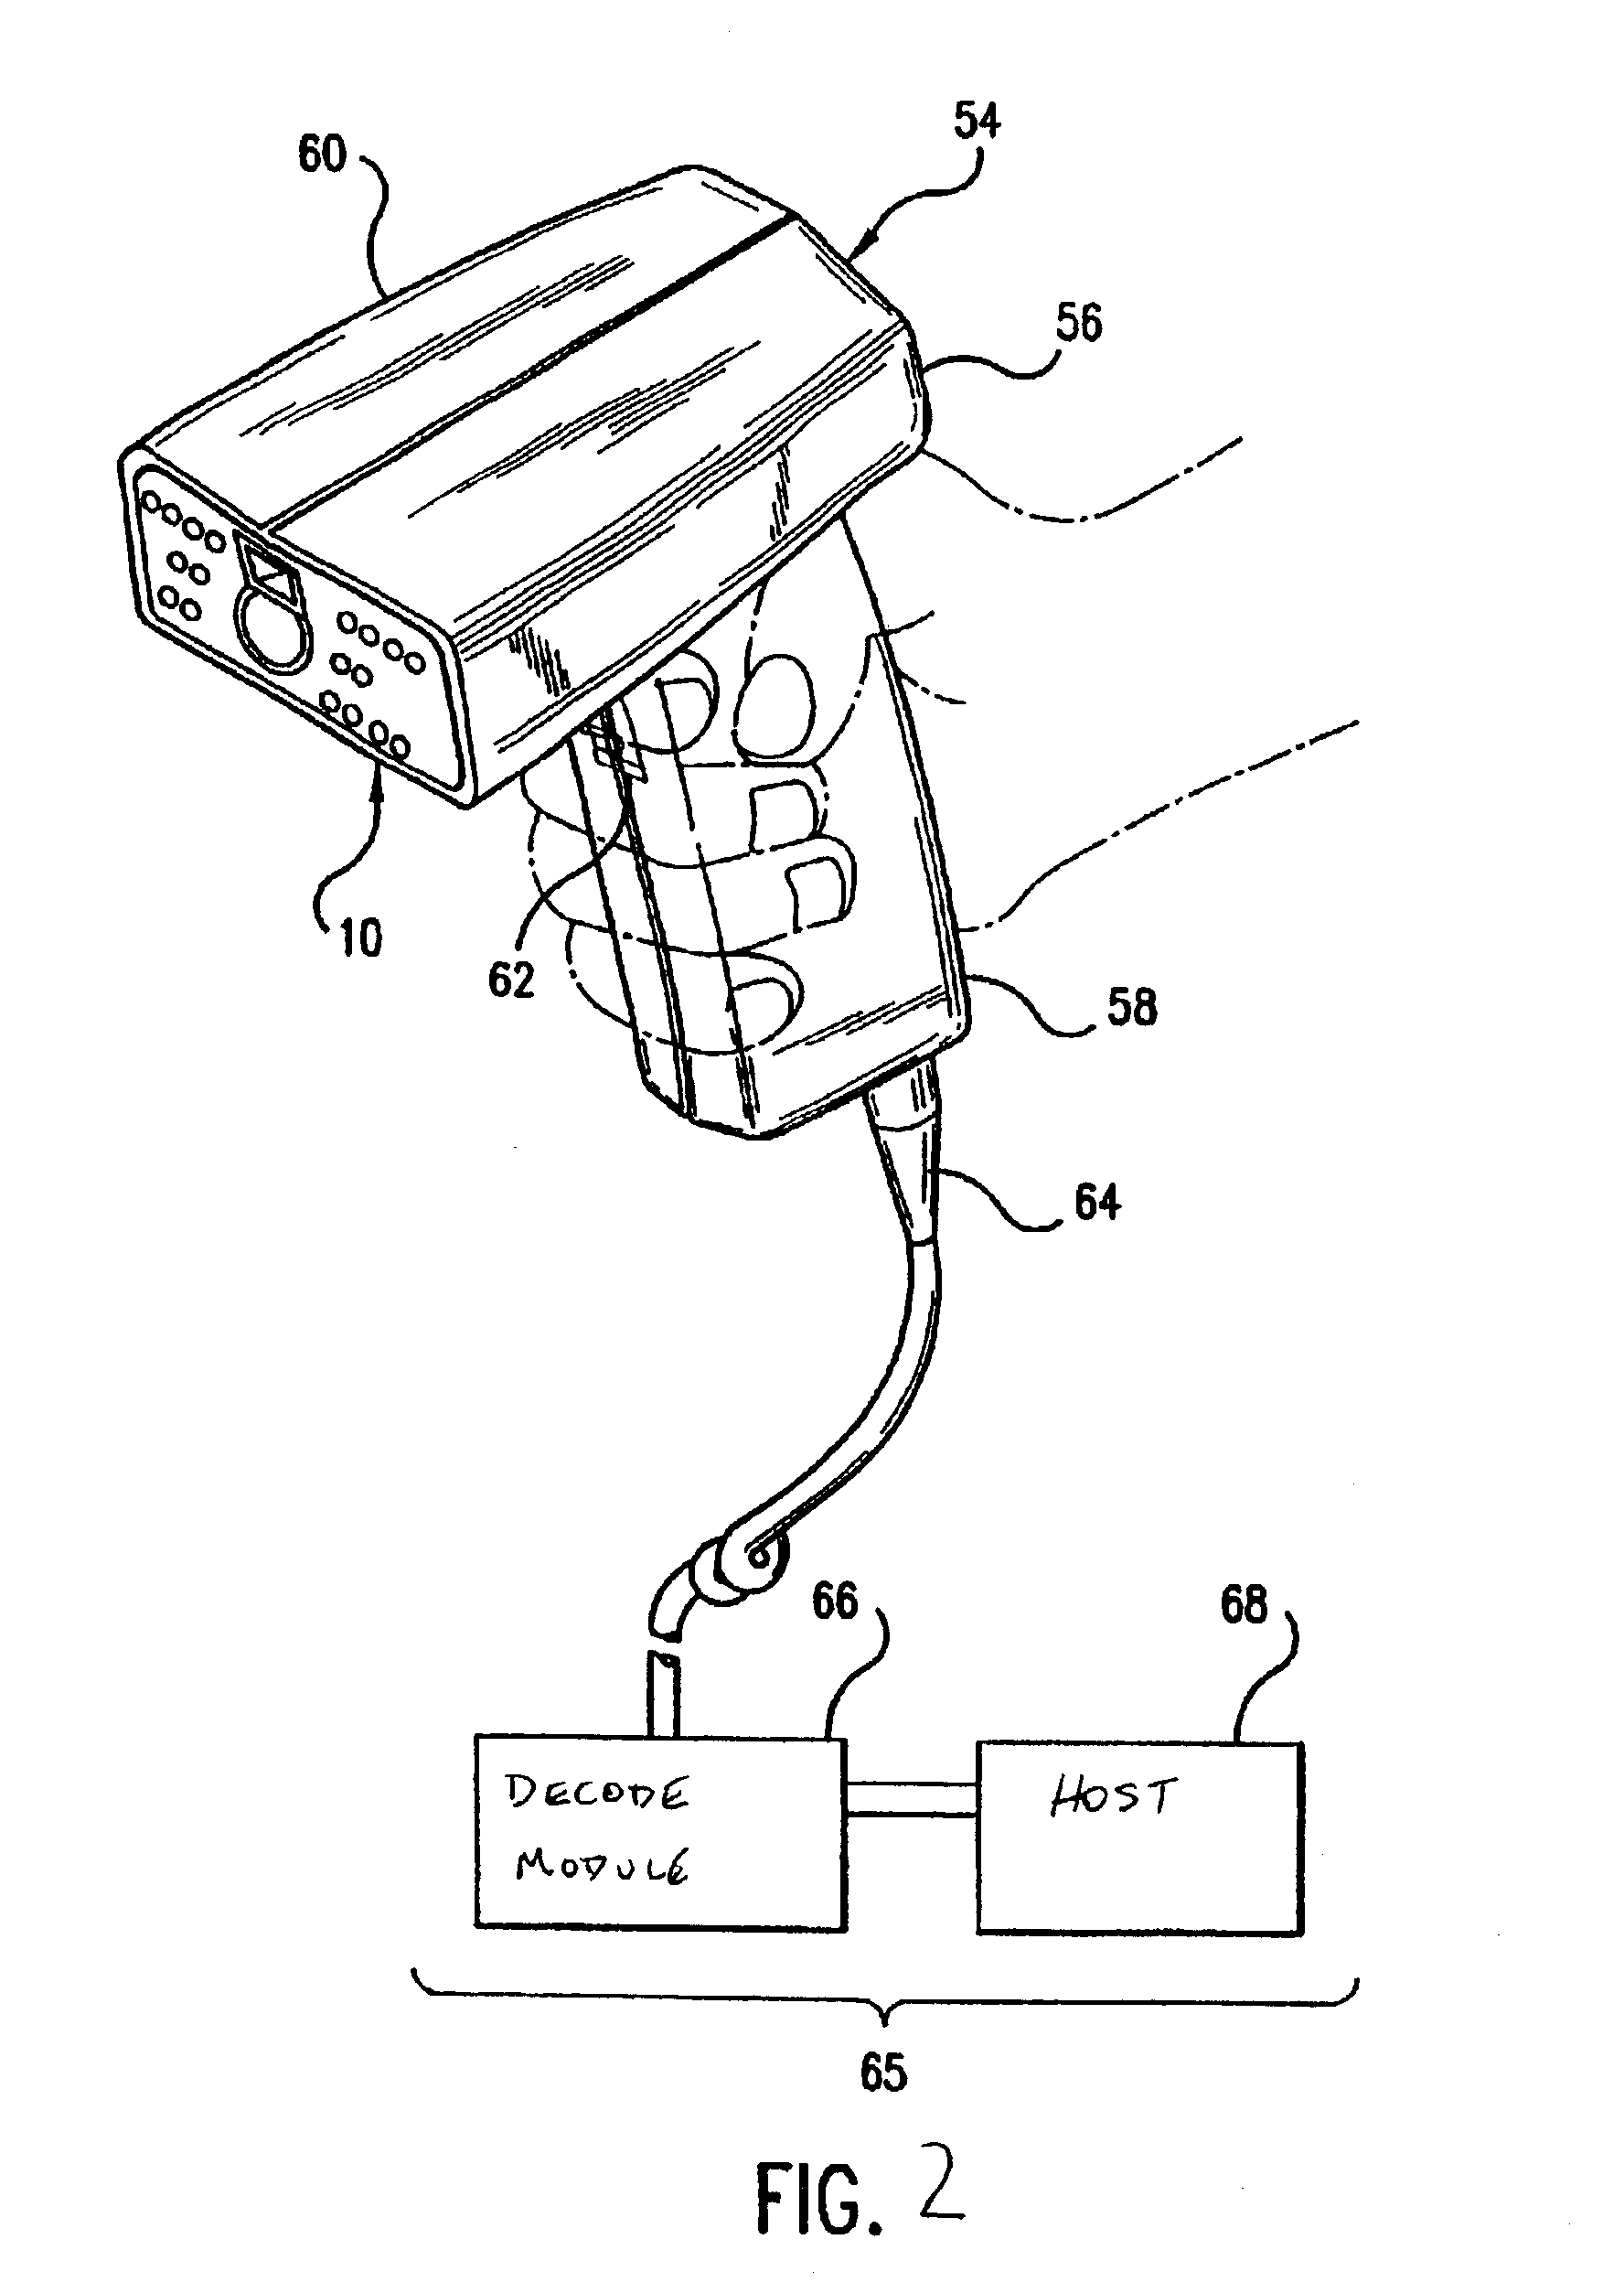 Image capture system and method